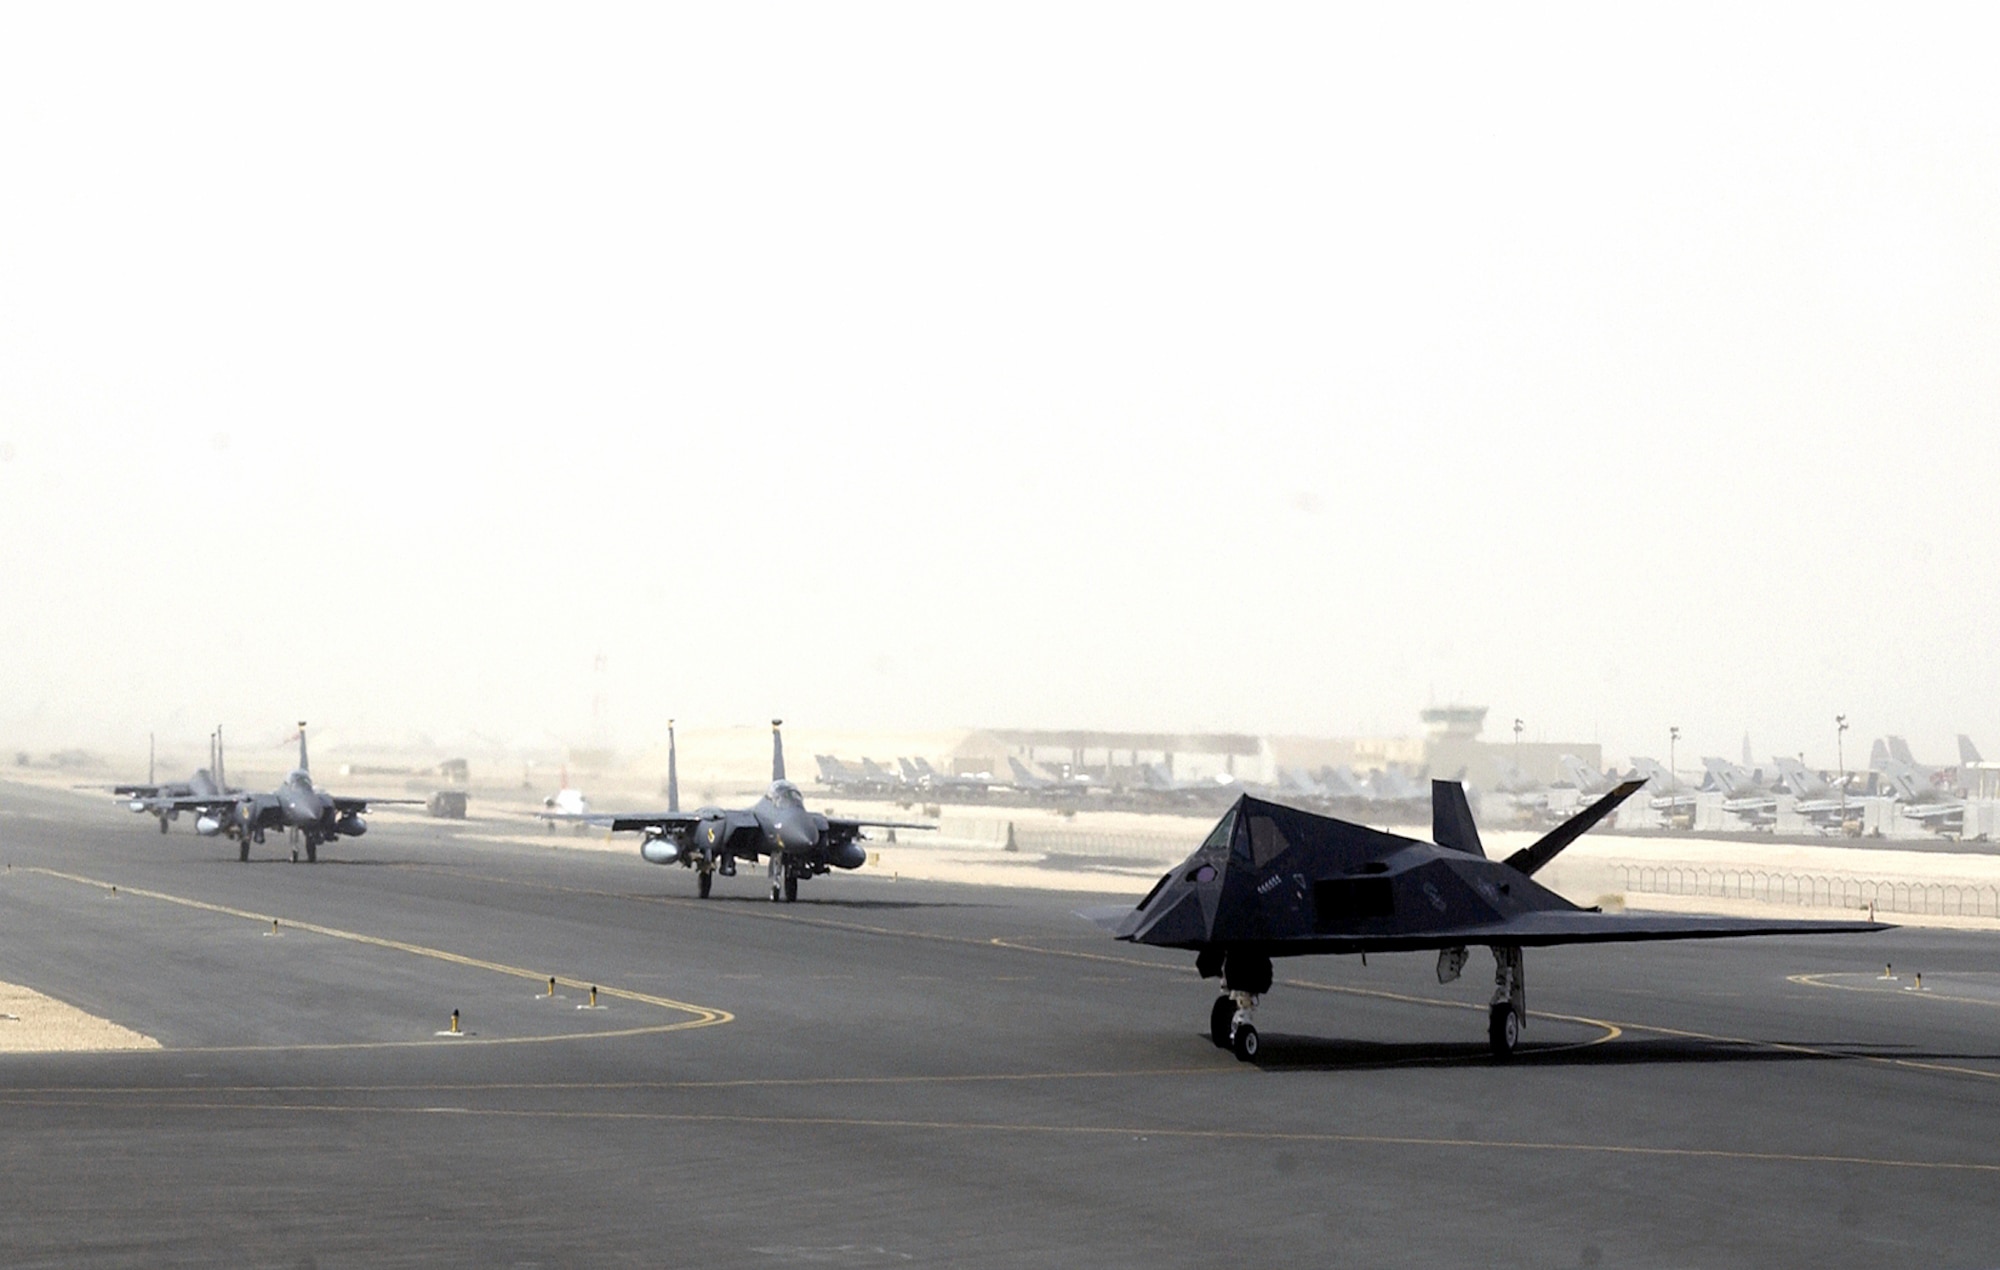 OPERATION IRAQI FREEDOM -- An F-117 from the 8th Expeditionary Fighter Squadron out of Holloman A.F.B., NM, followed by F-15s from Seymour Johnson Air Force Base, N.C., prepare to launch from a forward-deployed air base in the Middle East on April 14, 2003. The 8th EFS has begun returning to Hollomann A.F.B. after having been deployed to the Middle East in support of Operation Iraqi Freedom. (U.S. Air Force photo by Staff Sgt. Derrick C. Goode)